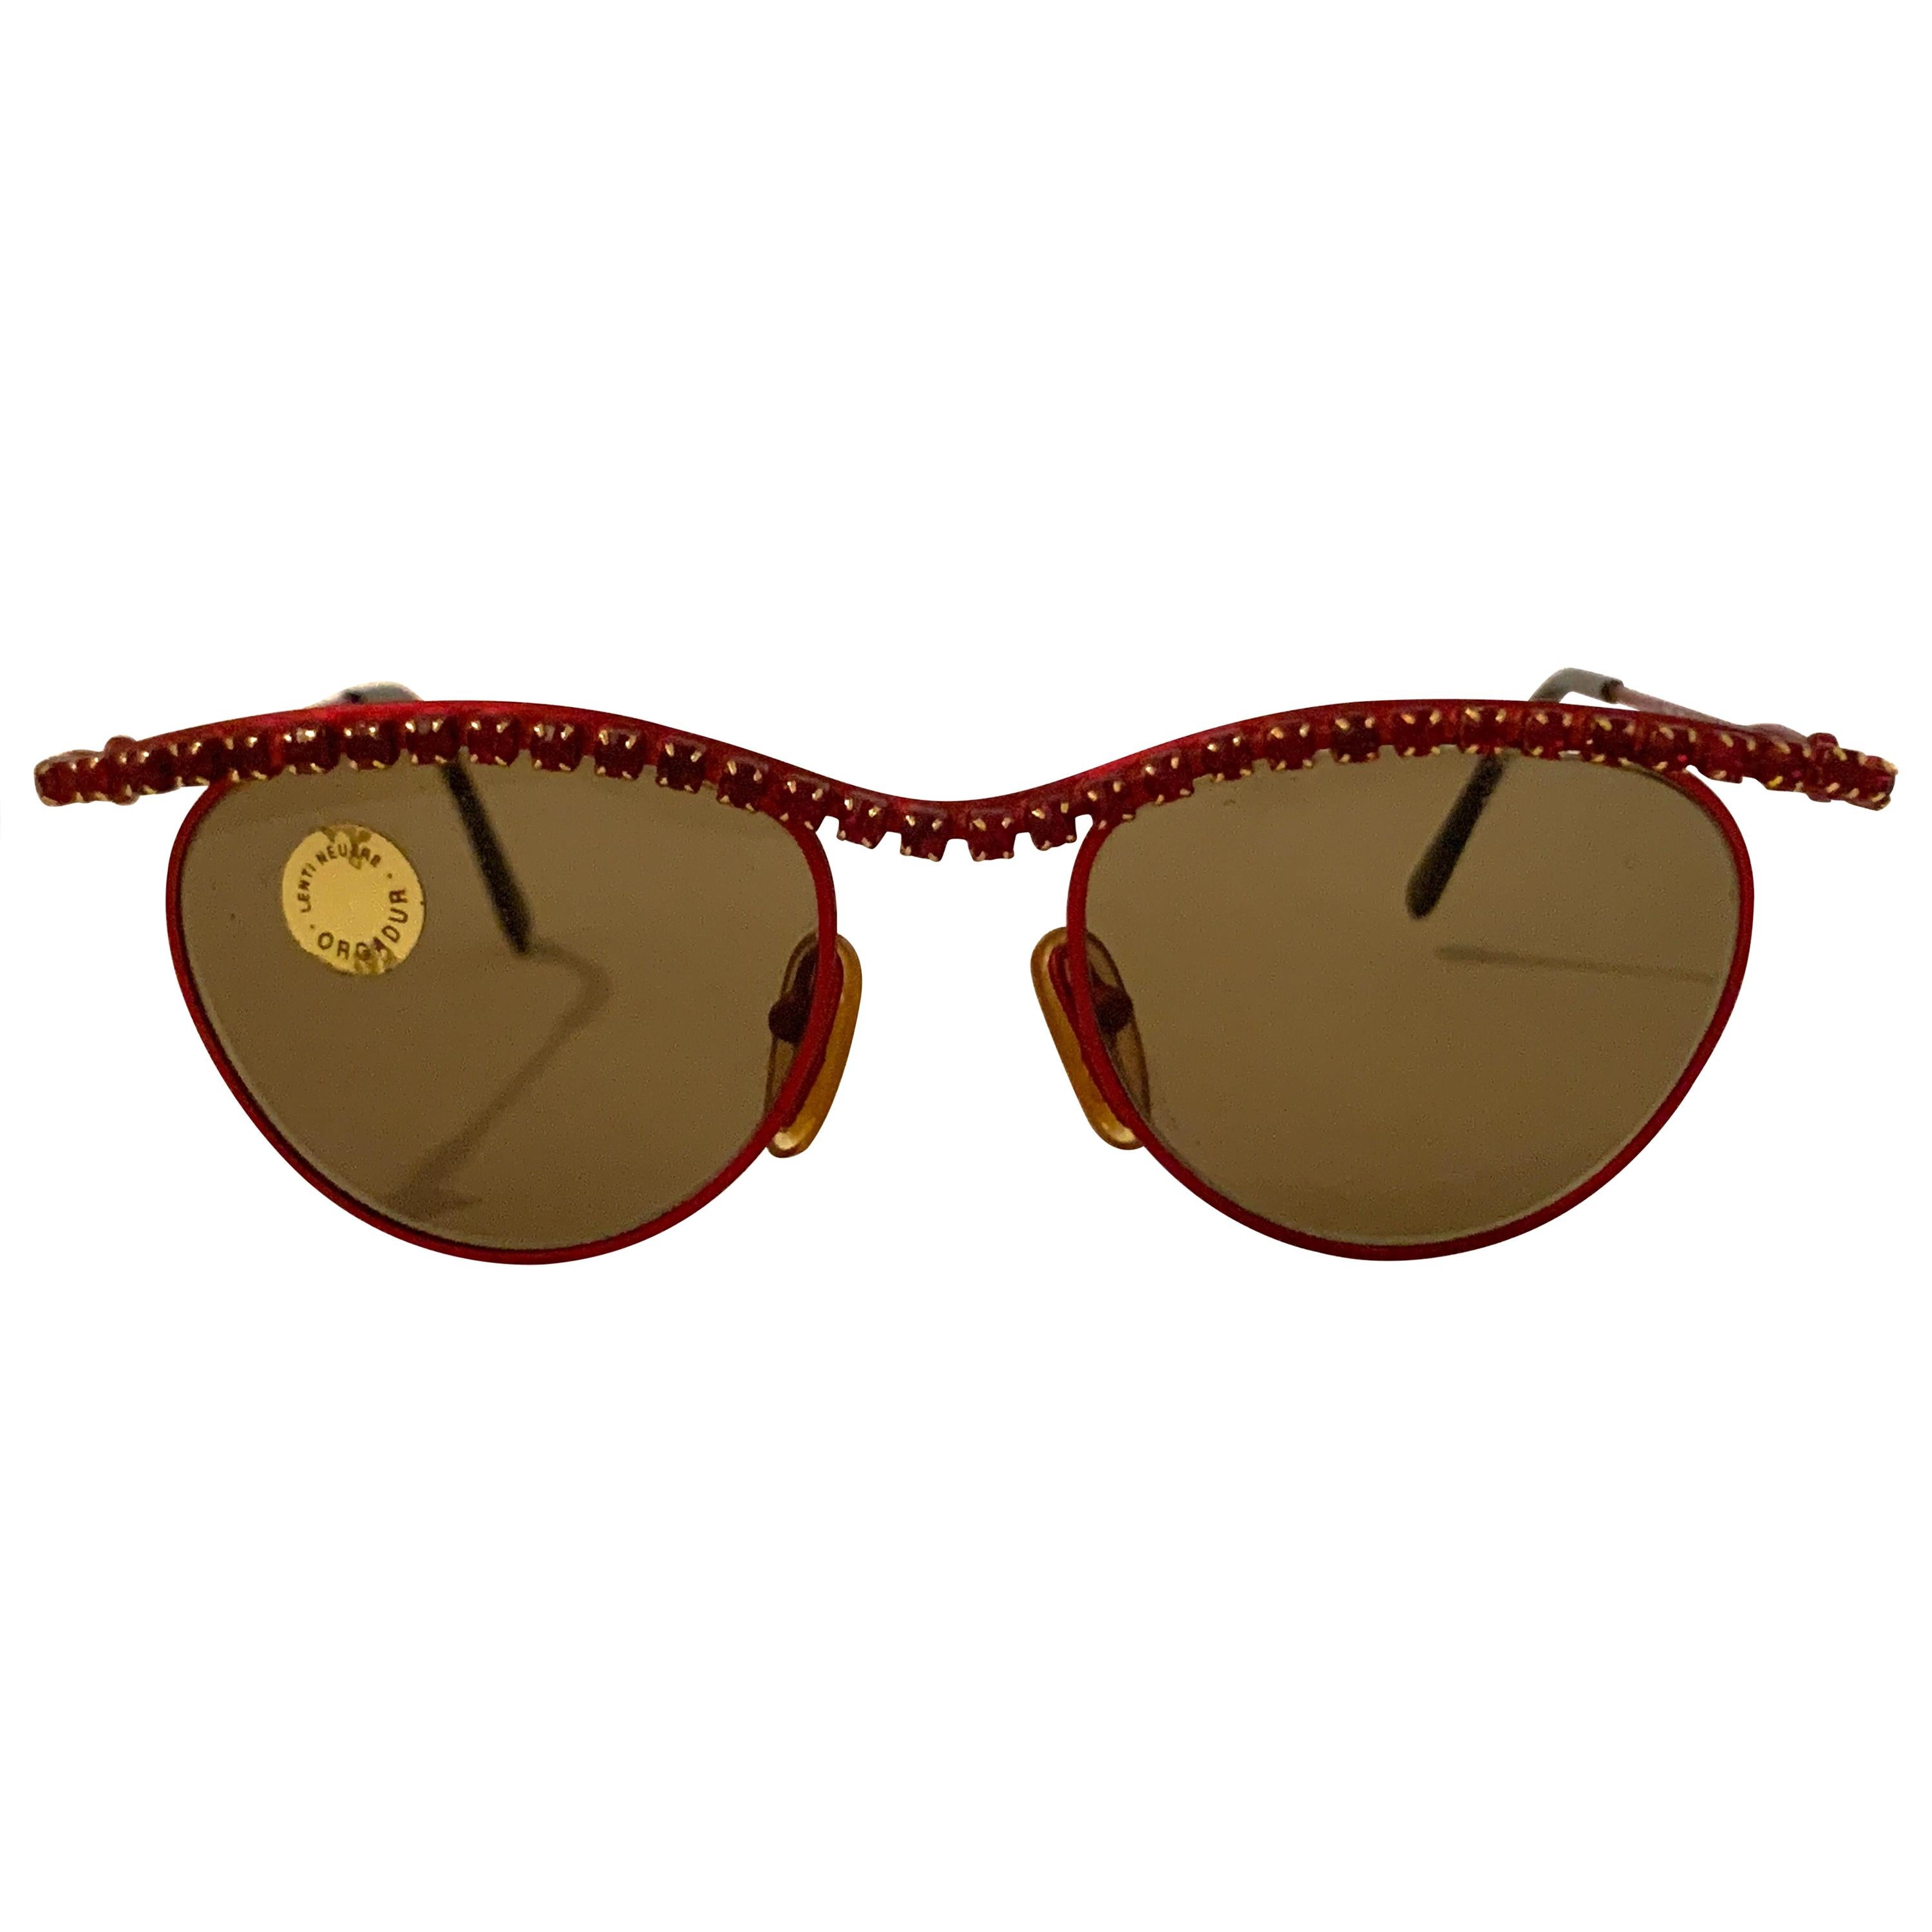 Vintage Moschino 1990s Red Metal and Rhinestone Sunglasses by Persol